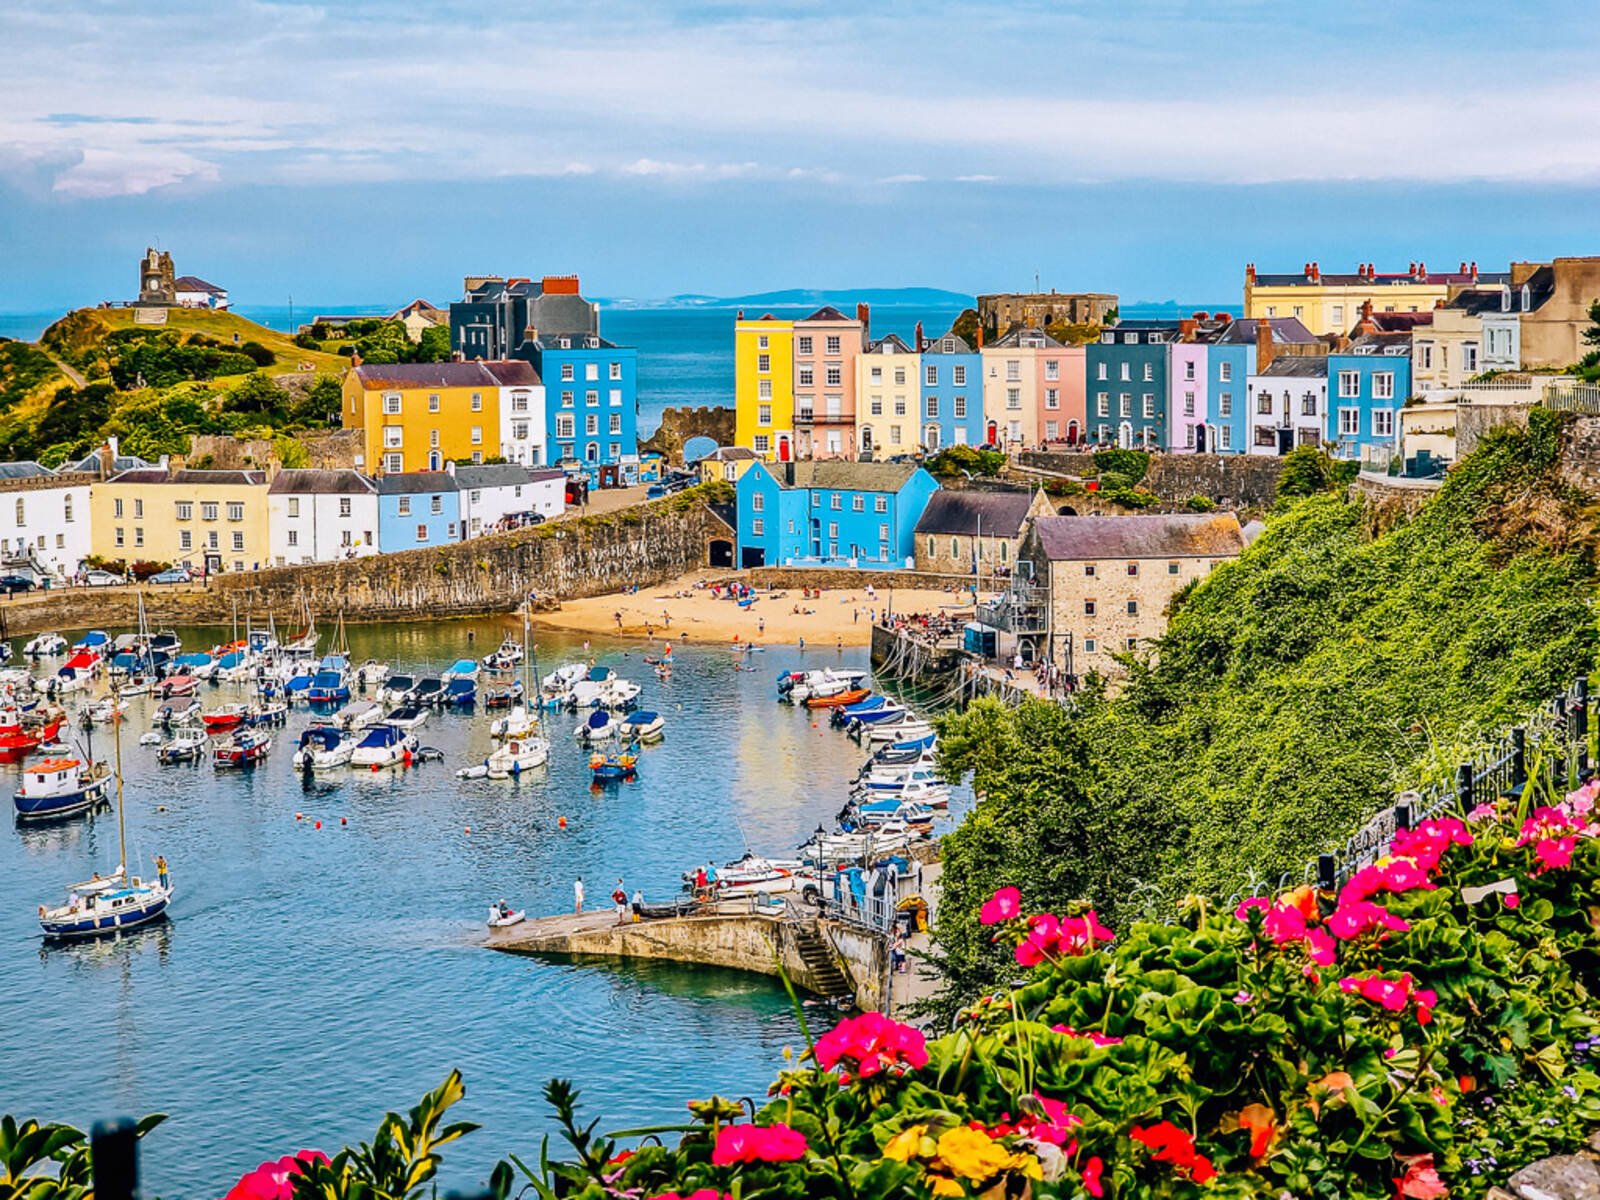 Looking across a harbour full of boats and lined with colourful houses at Tenby in Wales